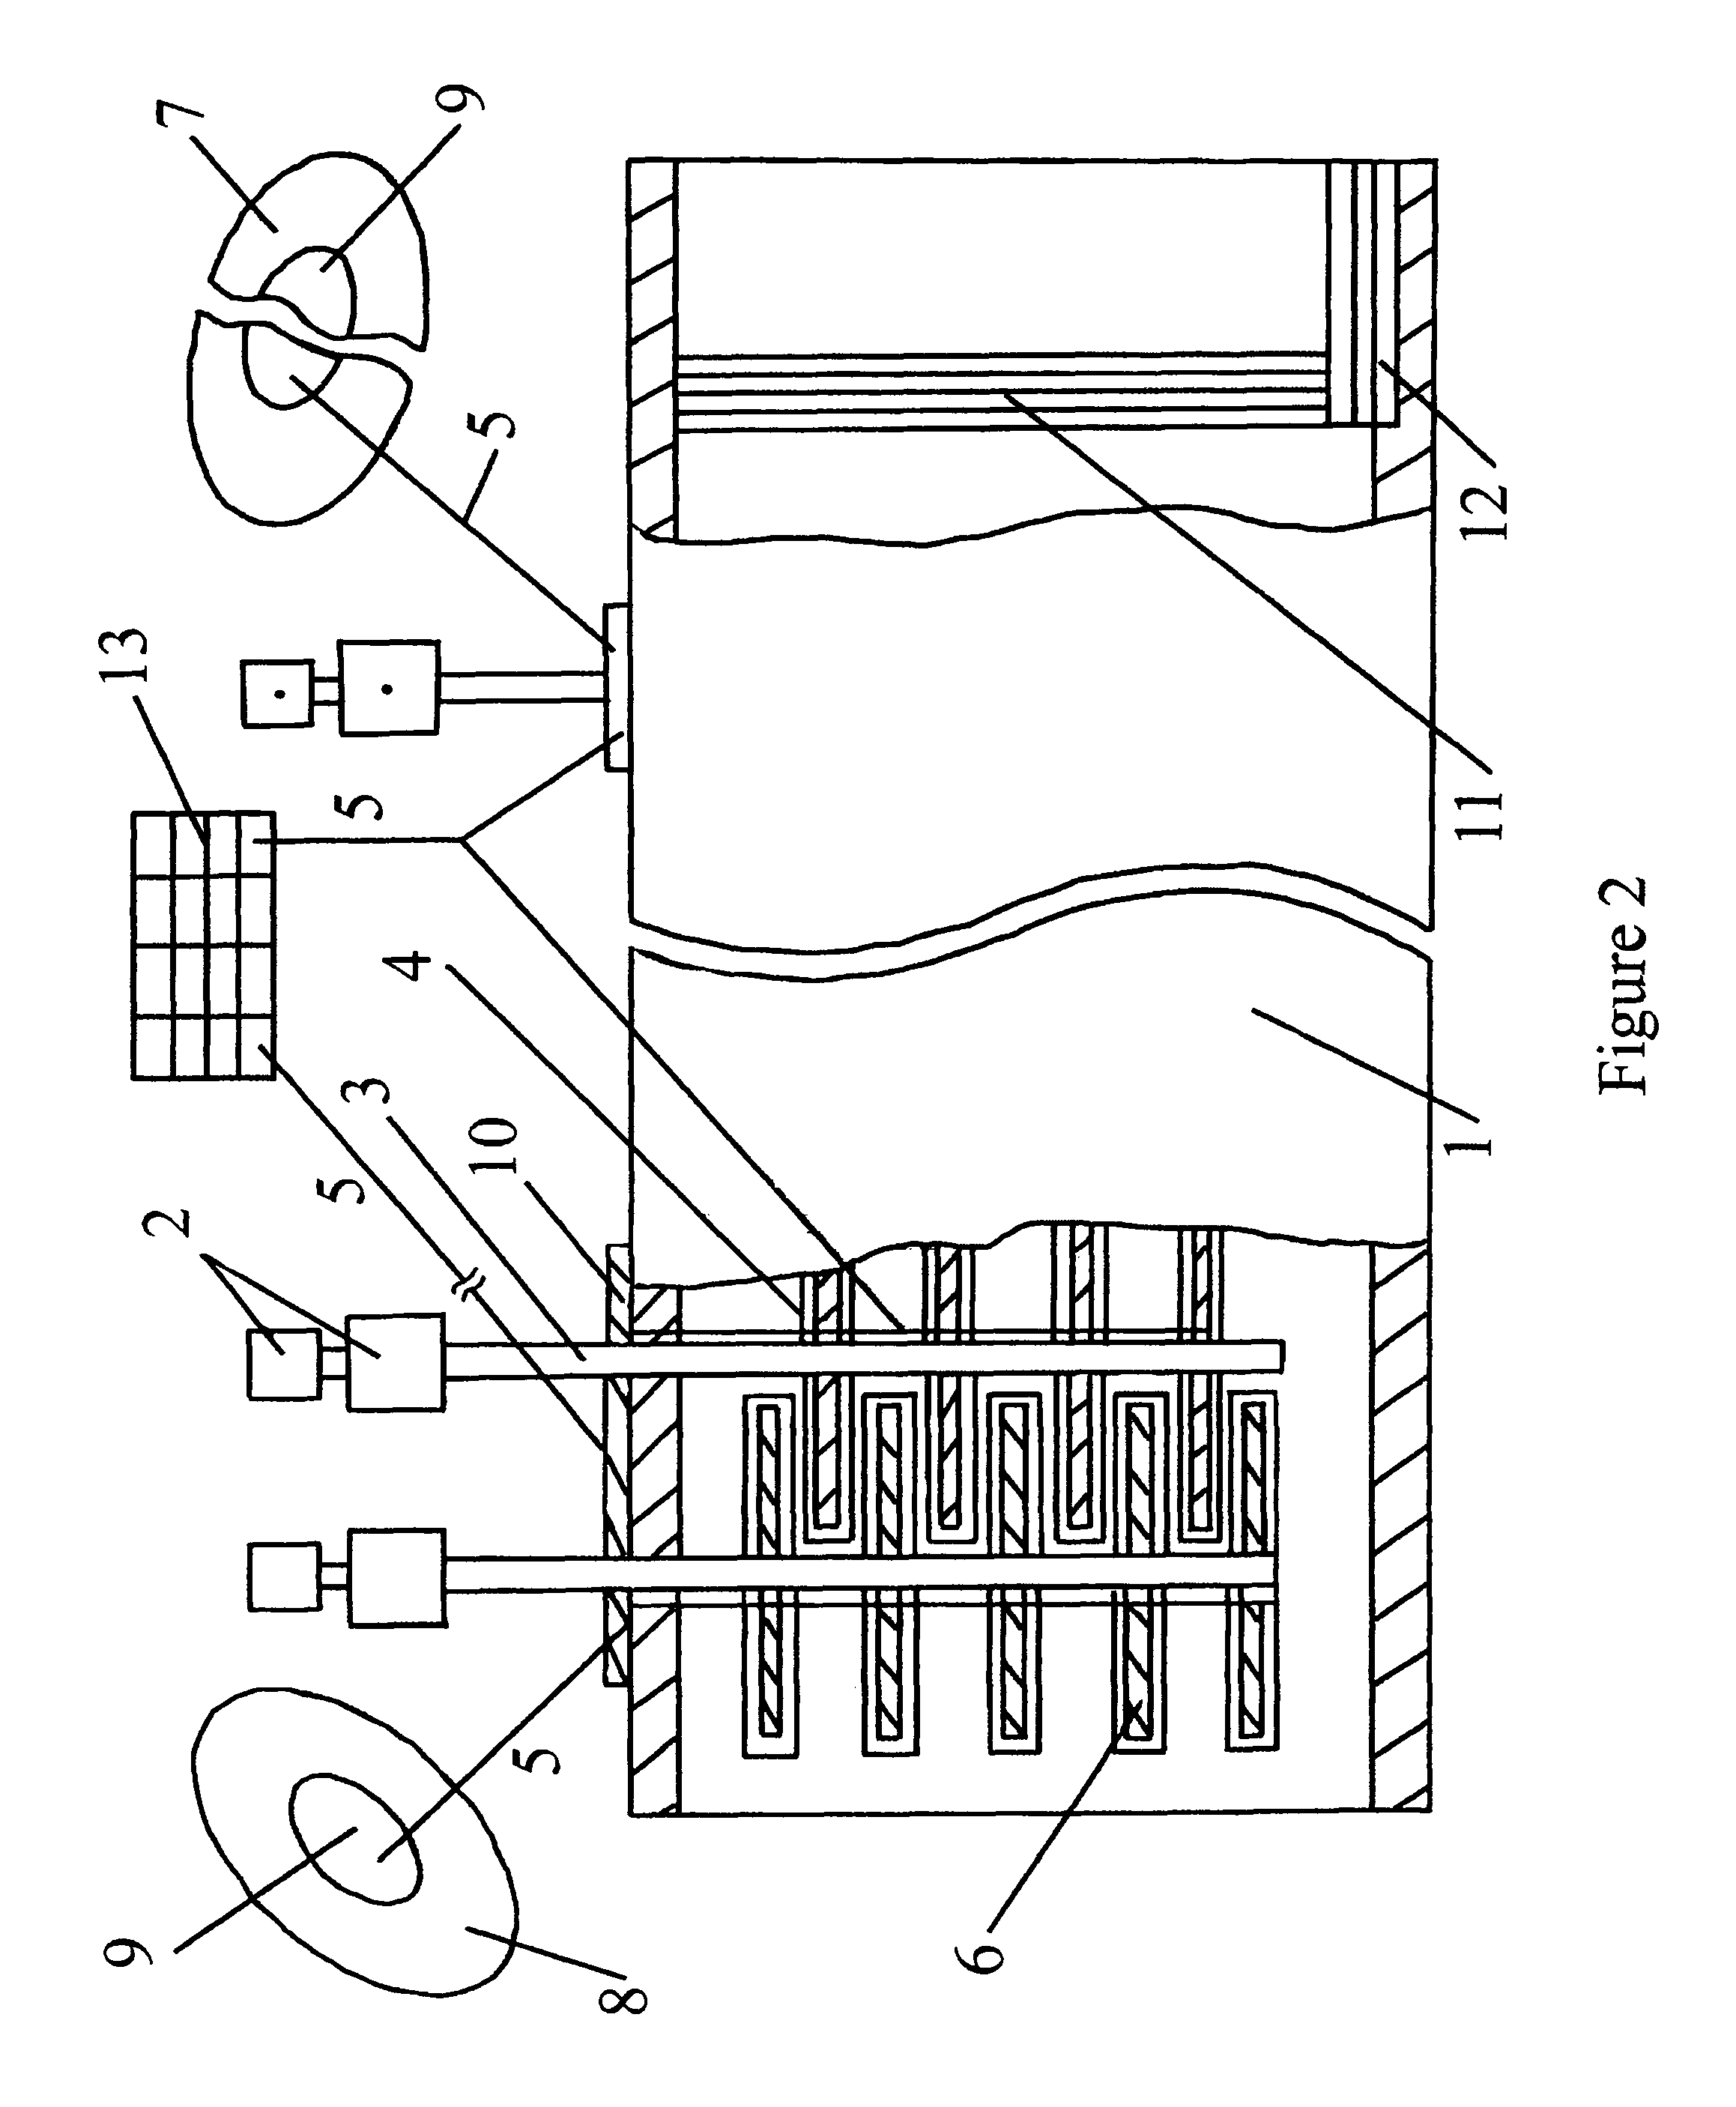 Photobioreactors for production of algae and methods therefor